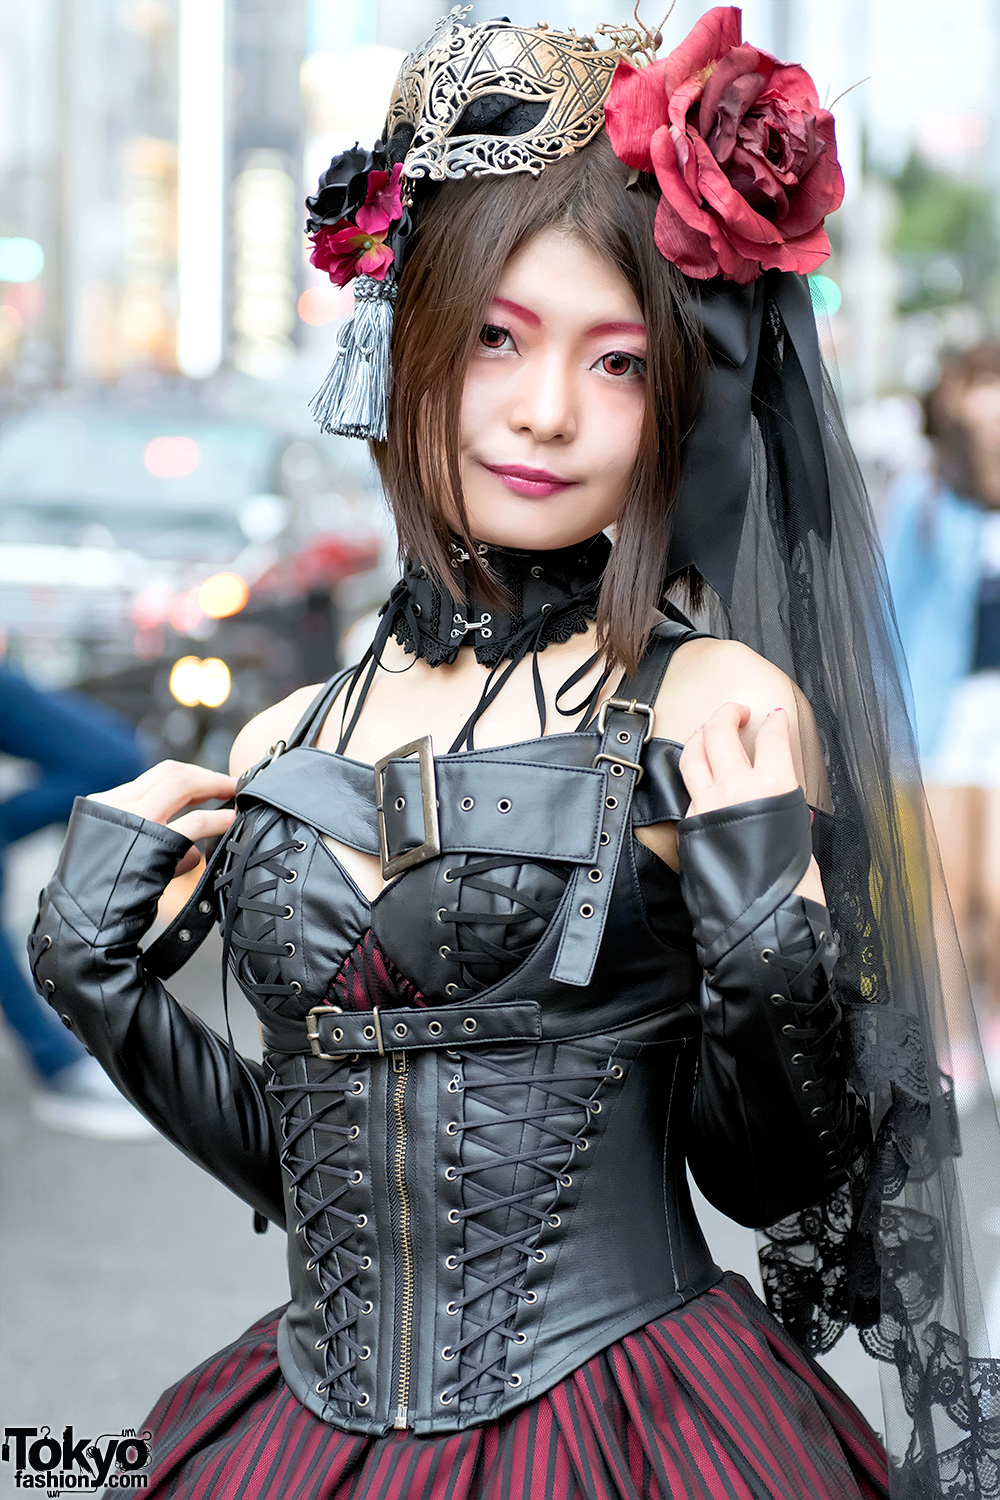 Japanese Gothic Leather Corset & Harness.